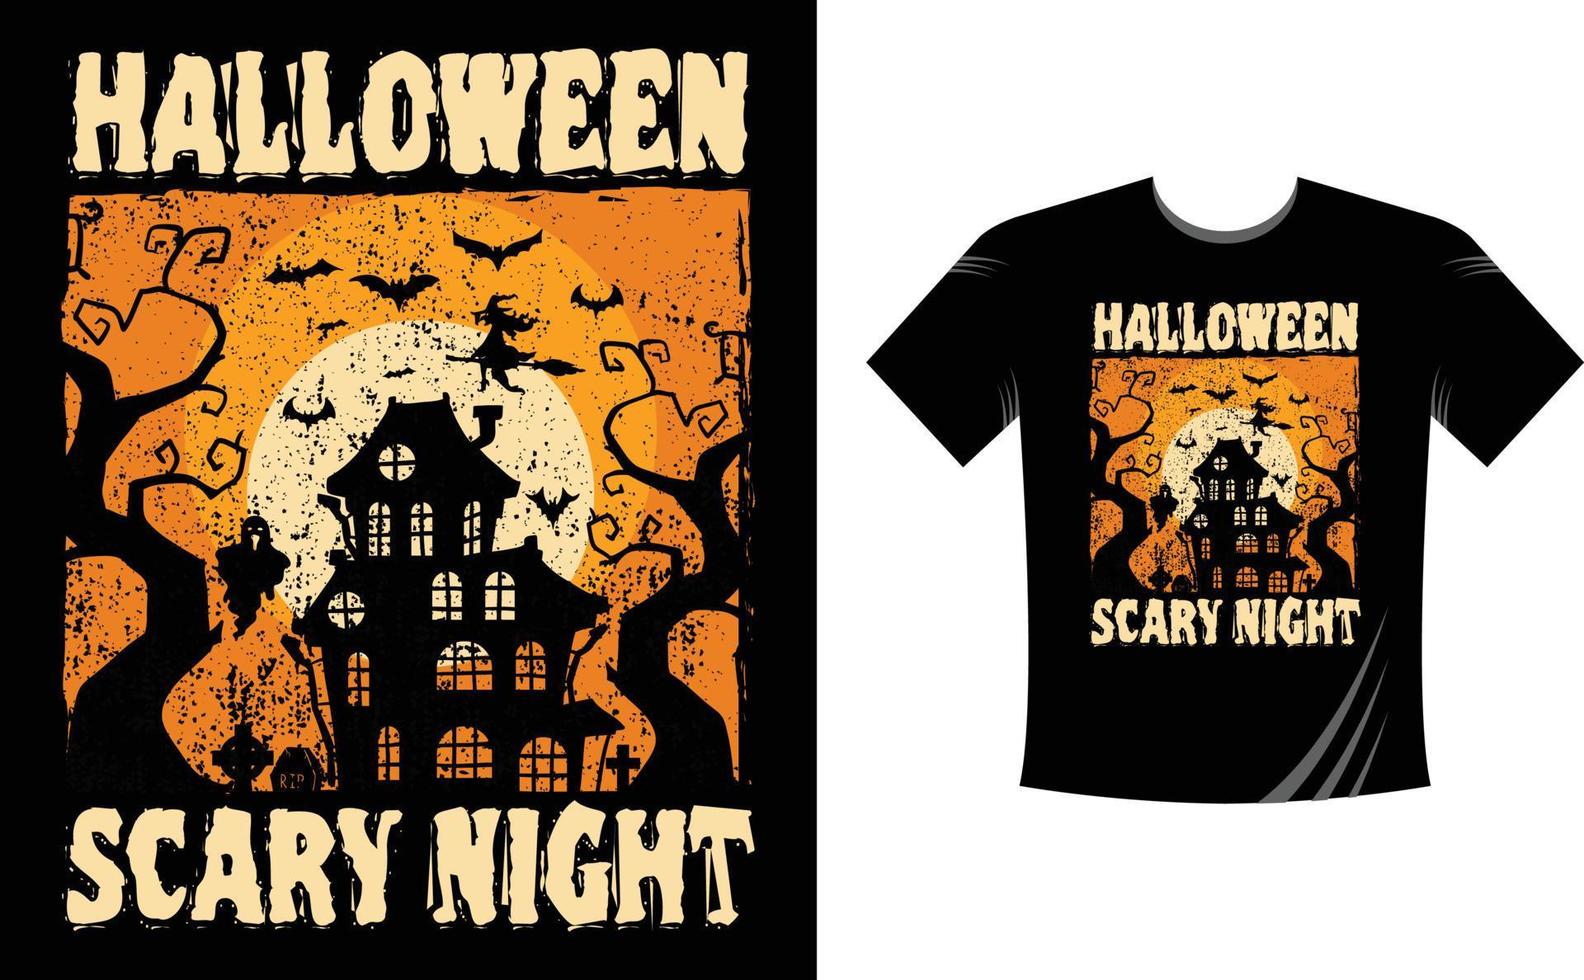 Halloween Scary Night - Halloween T-Shirt design template. Happy Halloween t-shirt design template easy to print all-purpose for men, women, and children vector